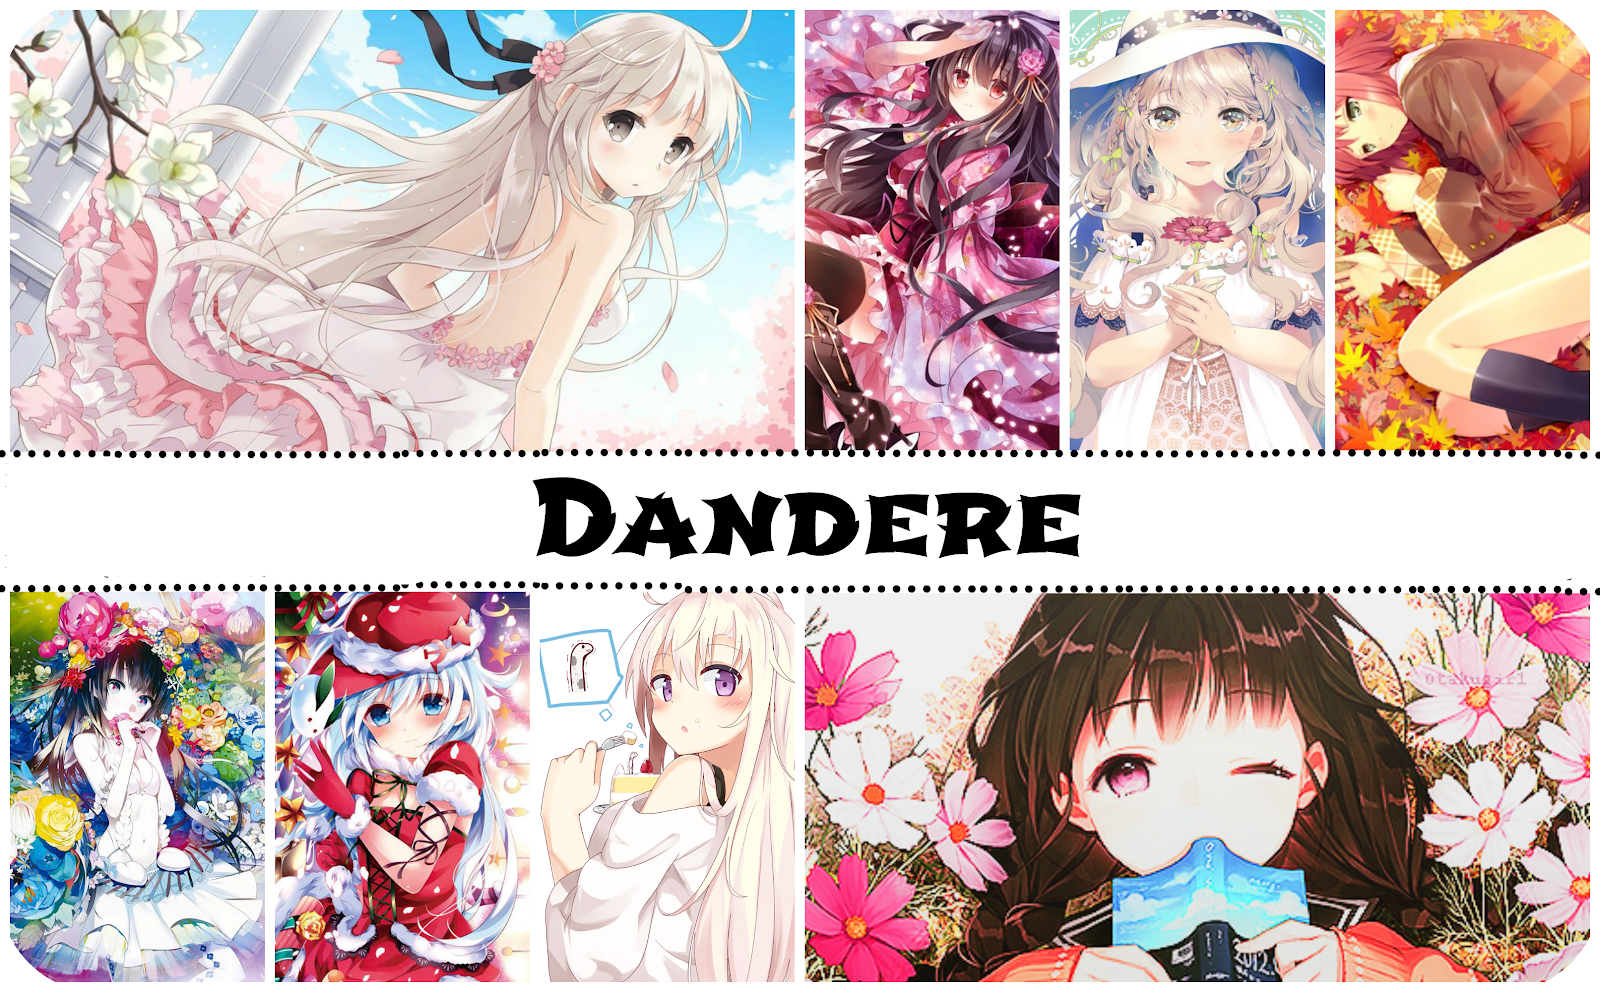 What Does Dandere Mean - The Shy Anime Nerds